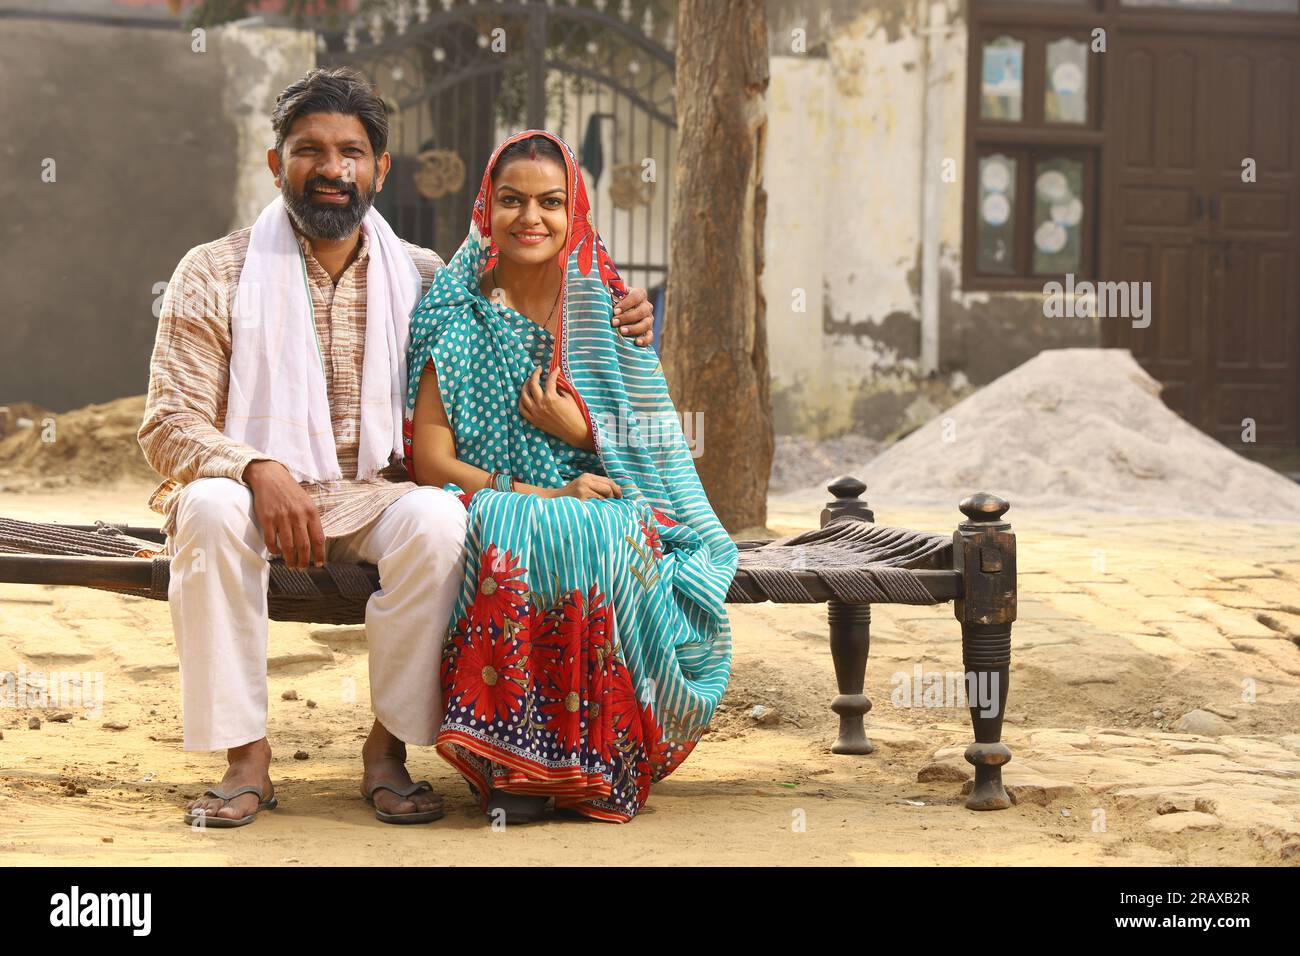 Happy Indian Rural family in village. Husband and wife sitting on cot outside their home front yard. man in kurta pajamas and wife in beautiful saree. Stock Photo